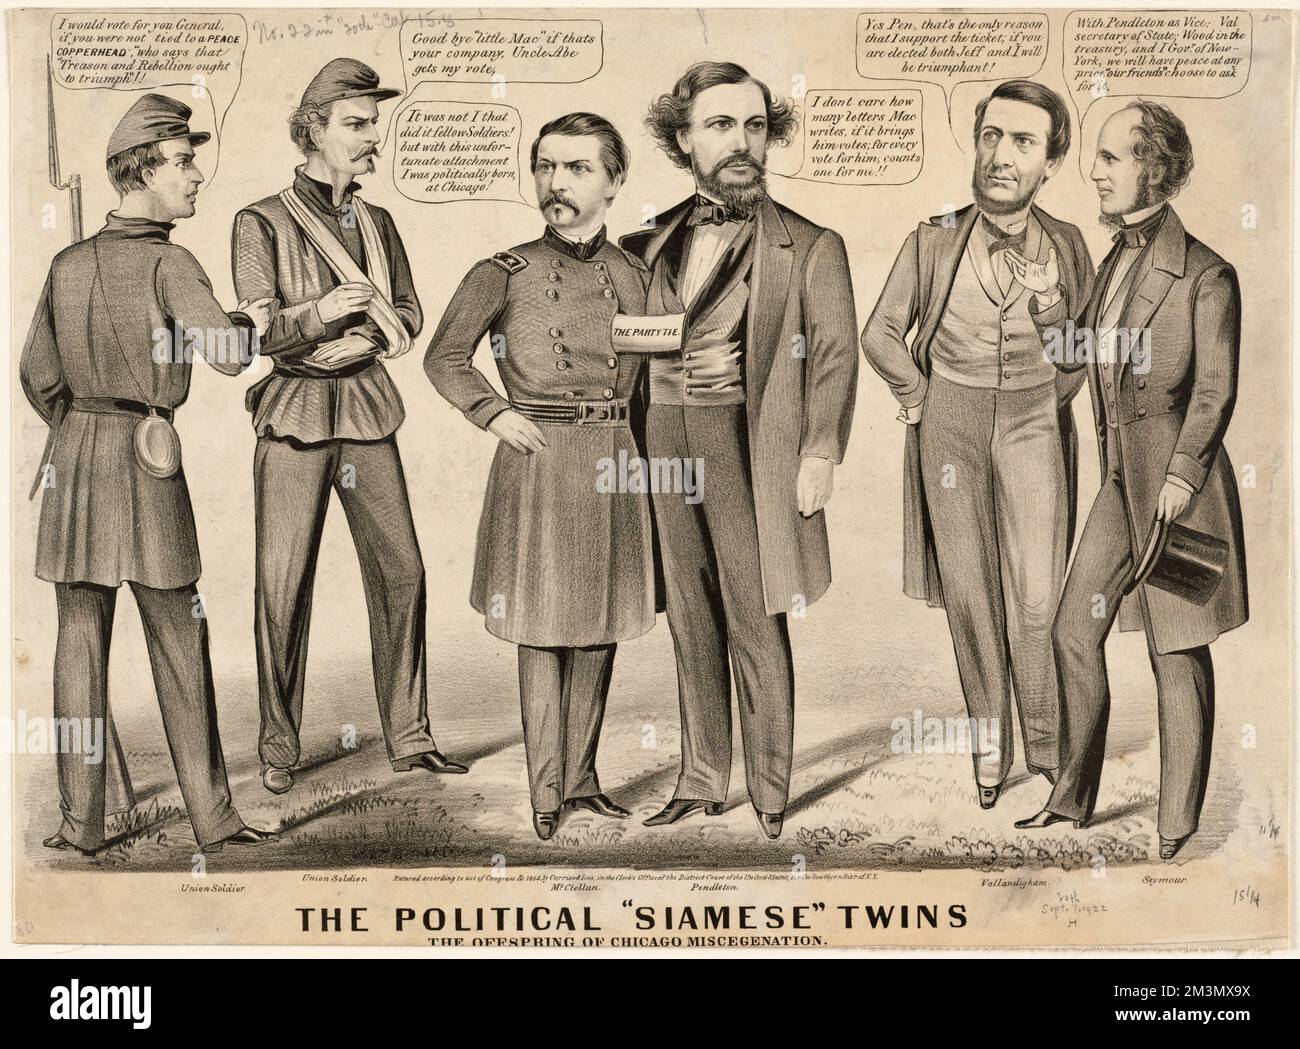 The political 'Siamese' twins, the offspring of Chicago miscegenation , Presidential elections, Politicians, Soldiers, United States, History, Civil War, 1861-1865, McClellan, George B. George Brinton, 1826-1885, Pendleton, George H. George Hunt, 1825-1889, Seymour, Horatio, 1810-1886, Vallandigham, Clement L. Clement Laird, 1820-1871 Stock Photo